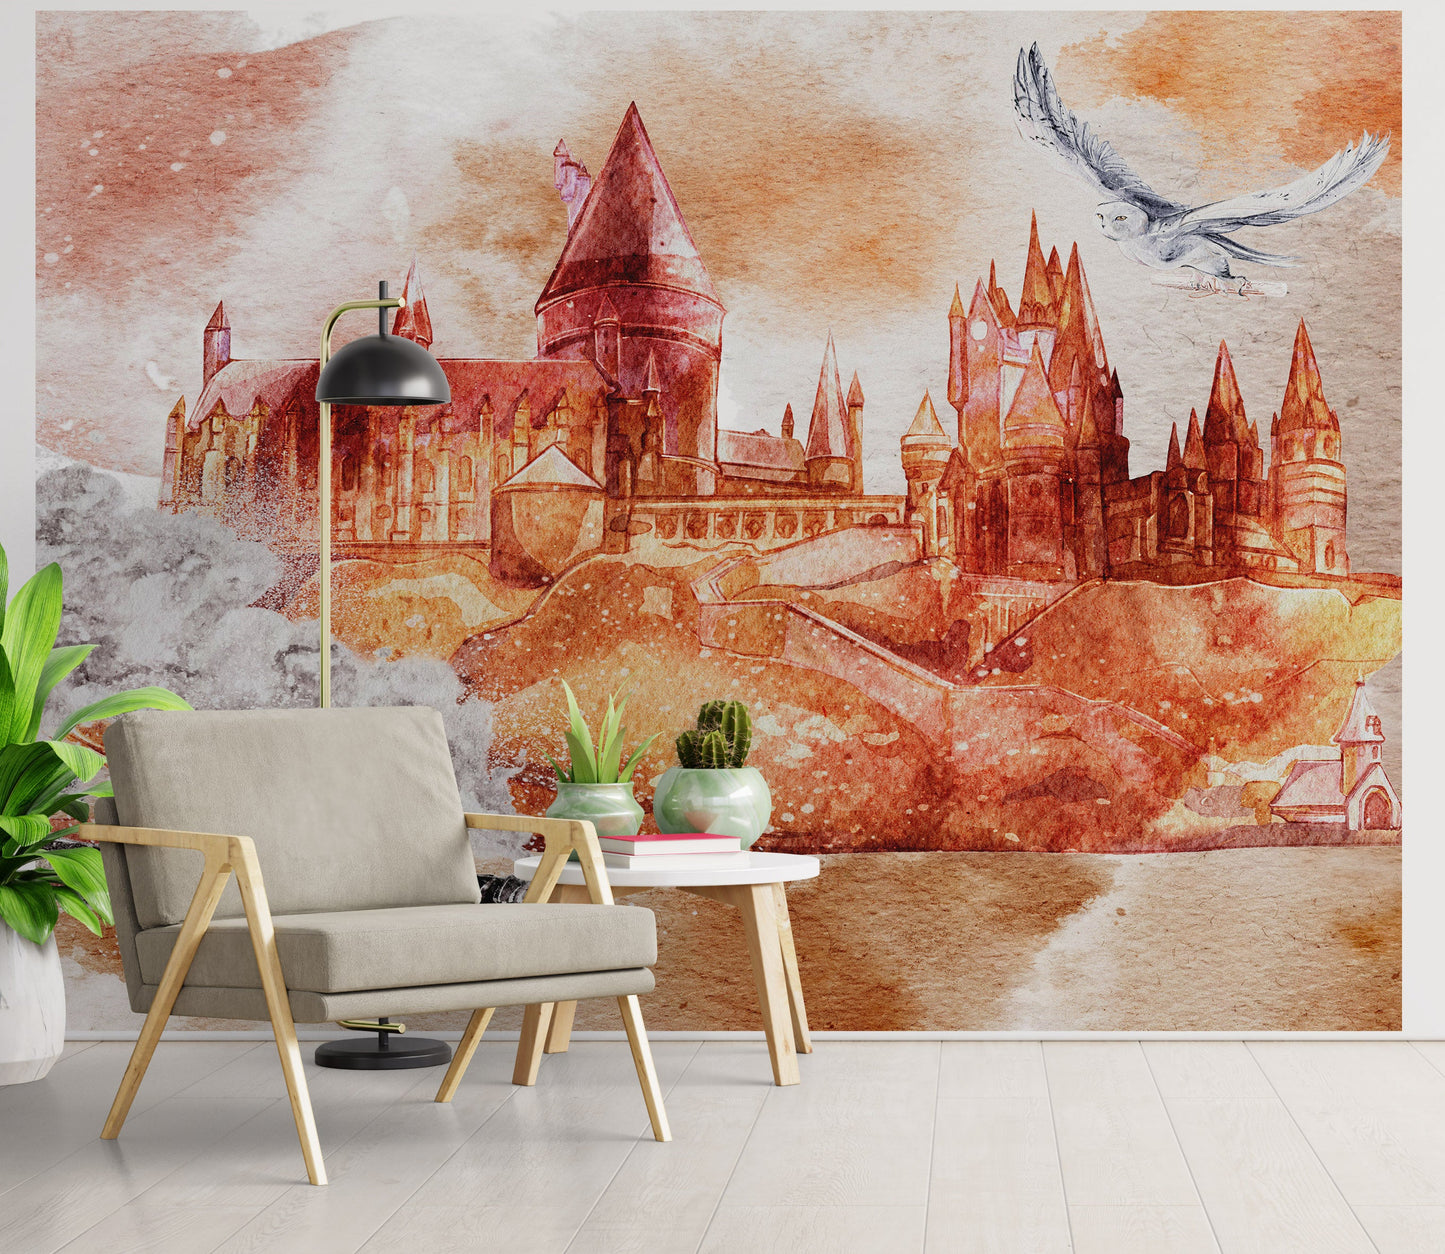 Wizardly World Wall Mural. Fantasy Theme with Castle / Train / Owl Peel and Stick Wallpaper. #6373